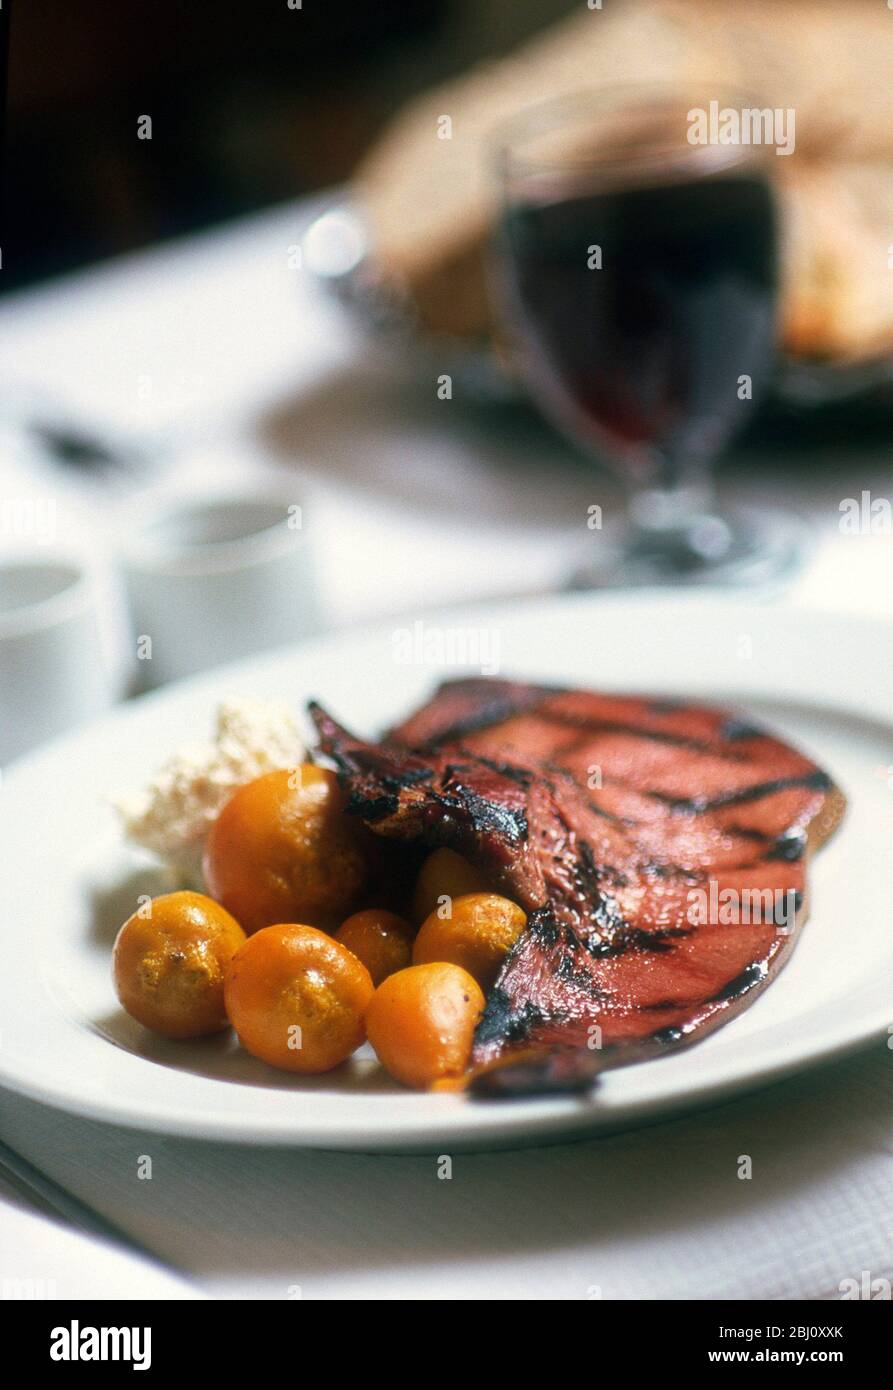 Grilled tongue and yellow beetroots at 'St John' restaurant for the Independent Magazine - Stock Photo